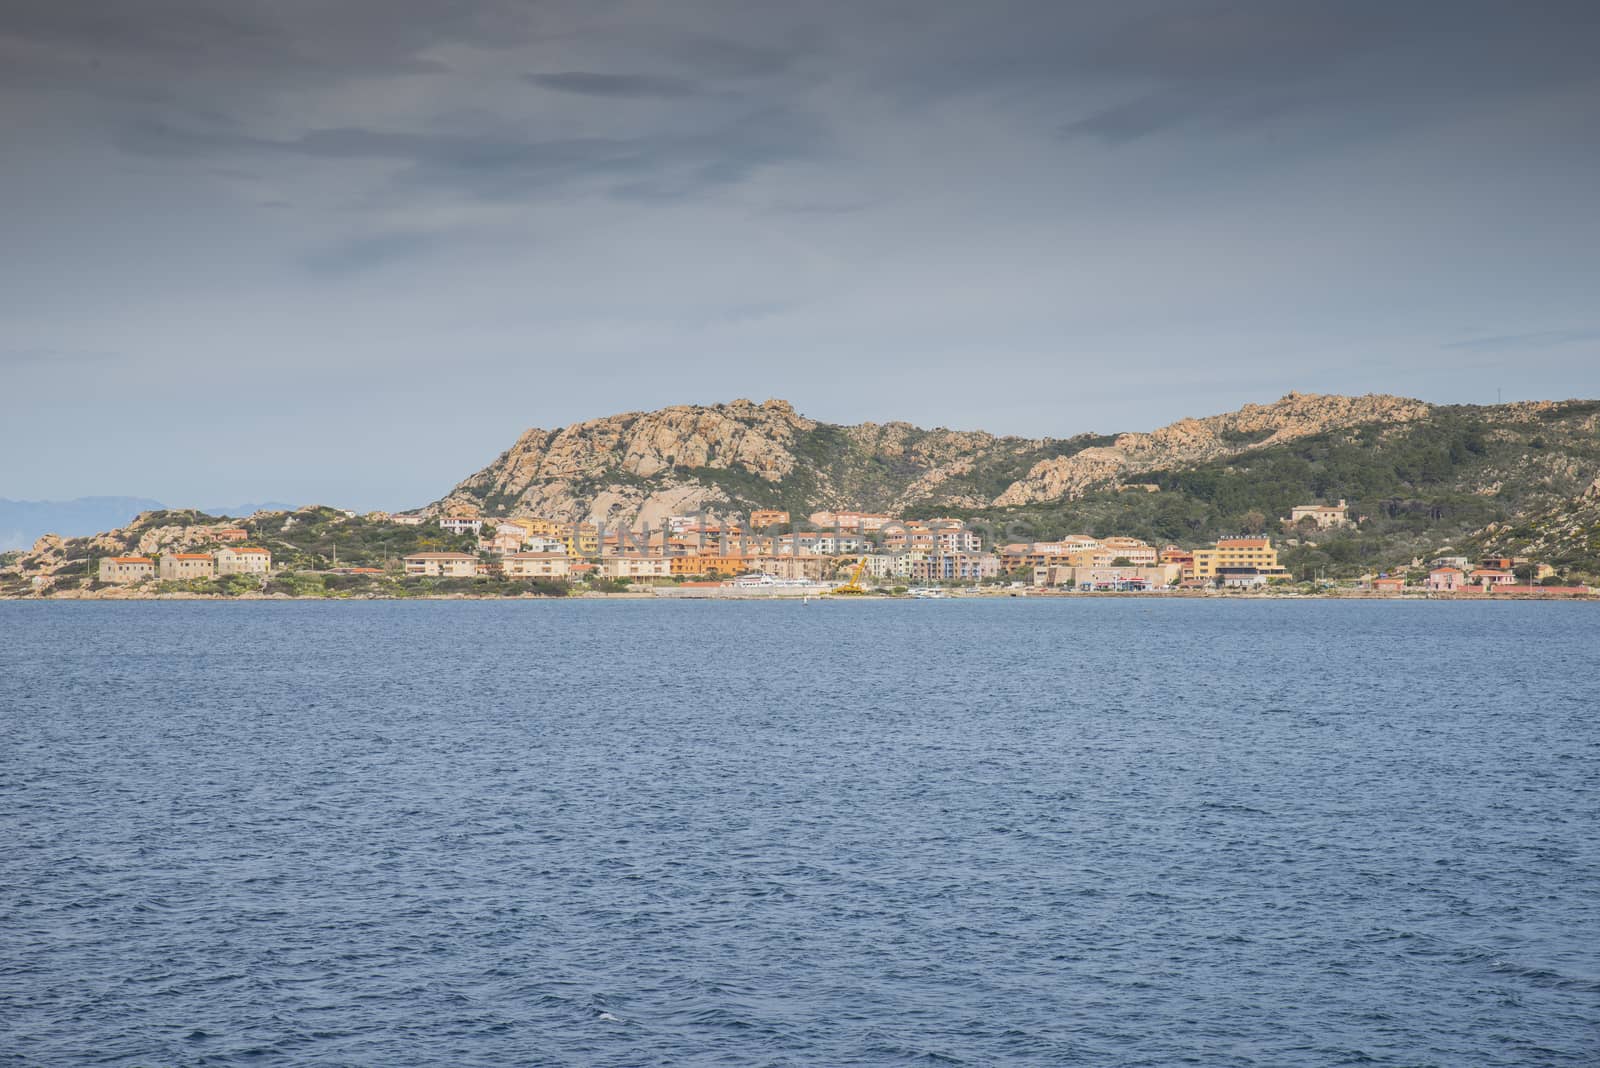 skyline of the island maddalena with the city la maddalena seen from the ferry from sardinia tyo the island